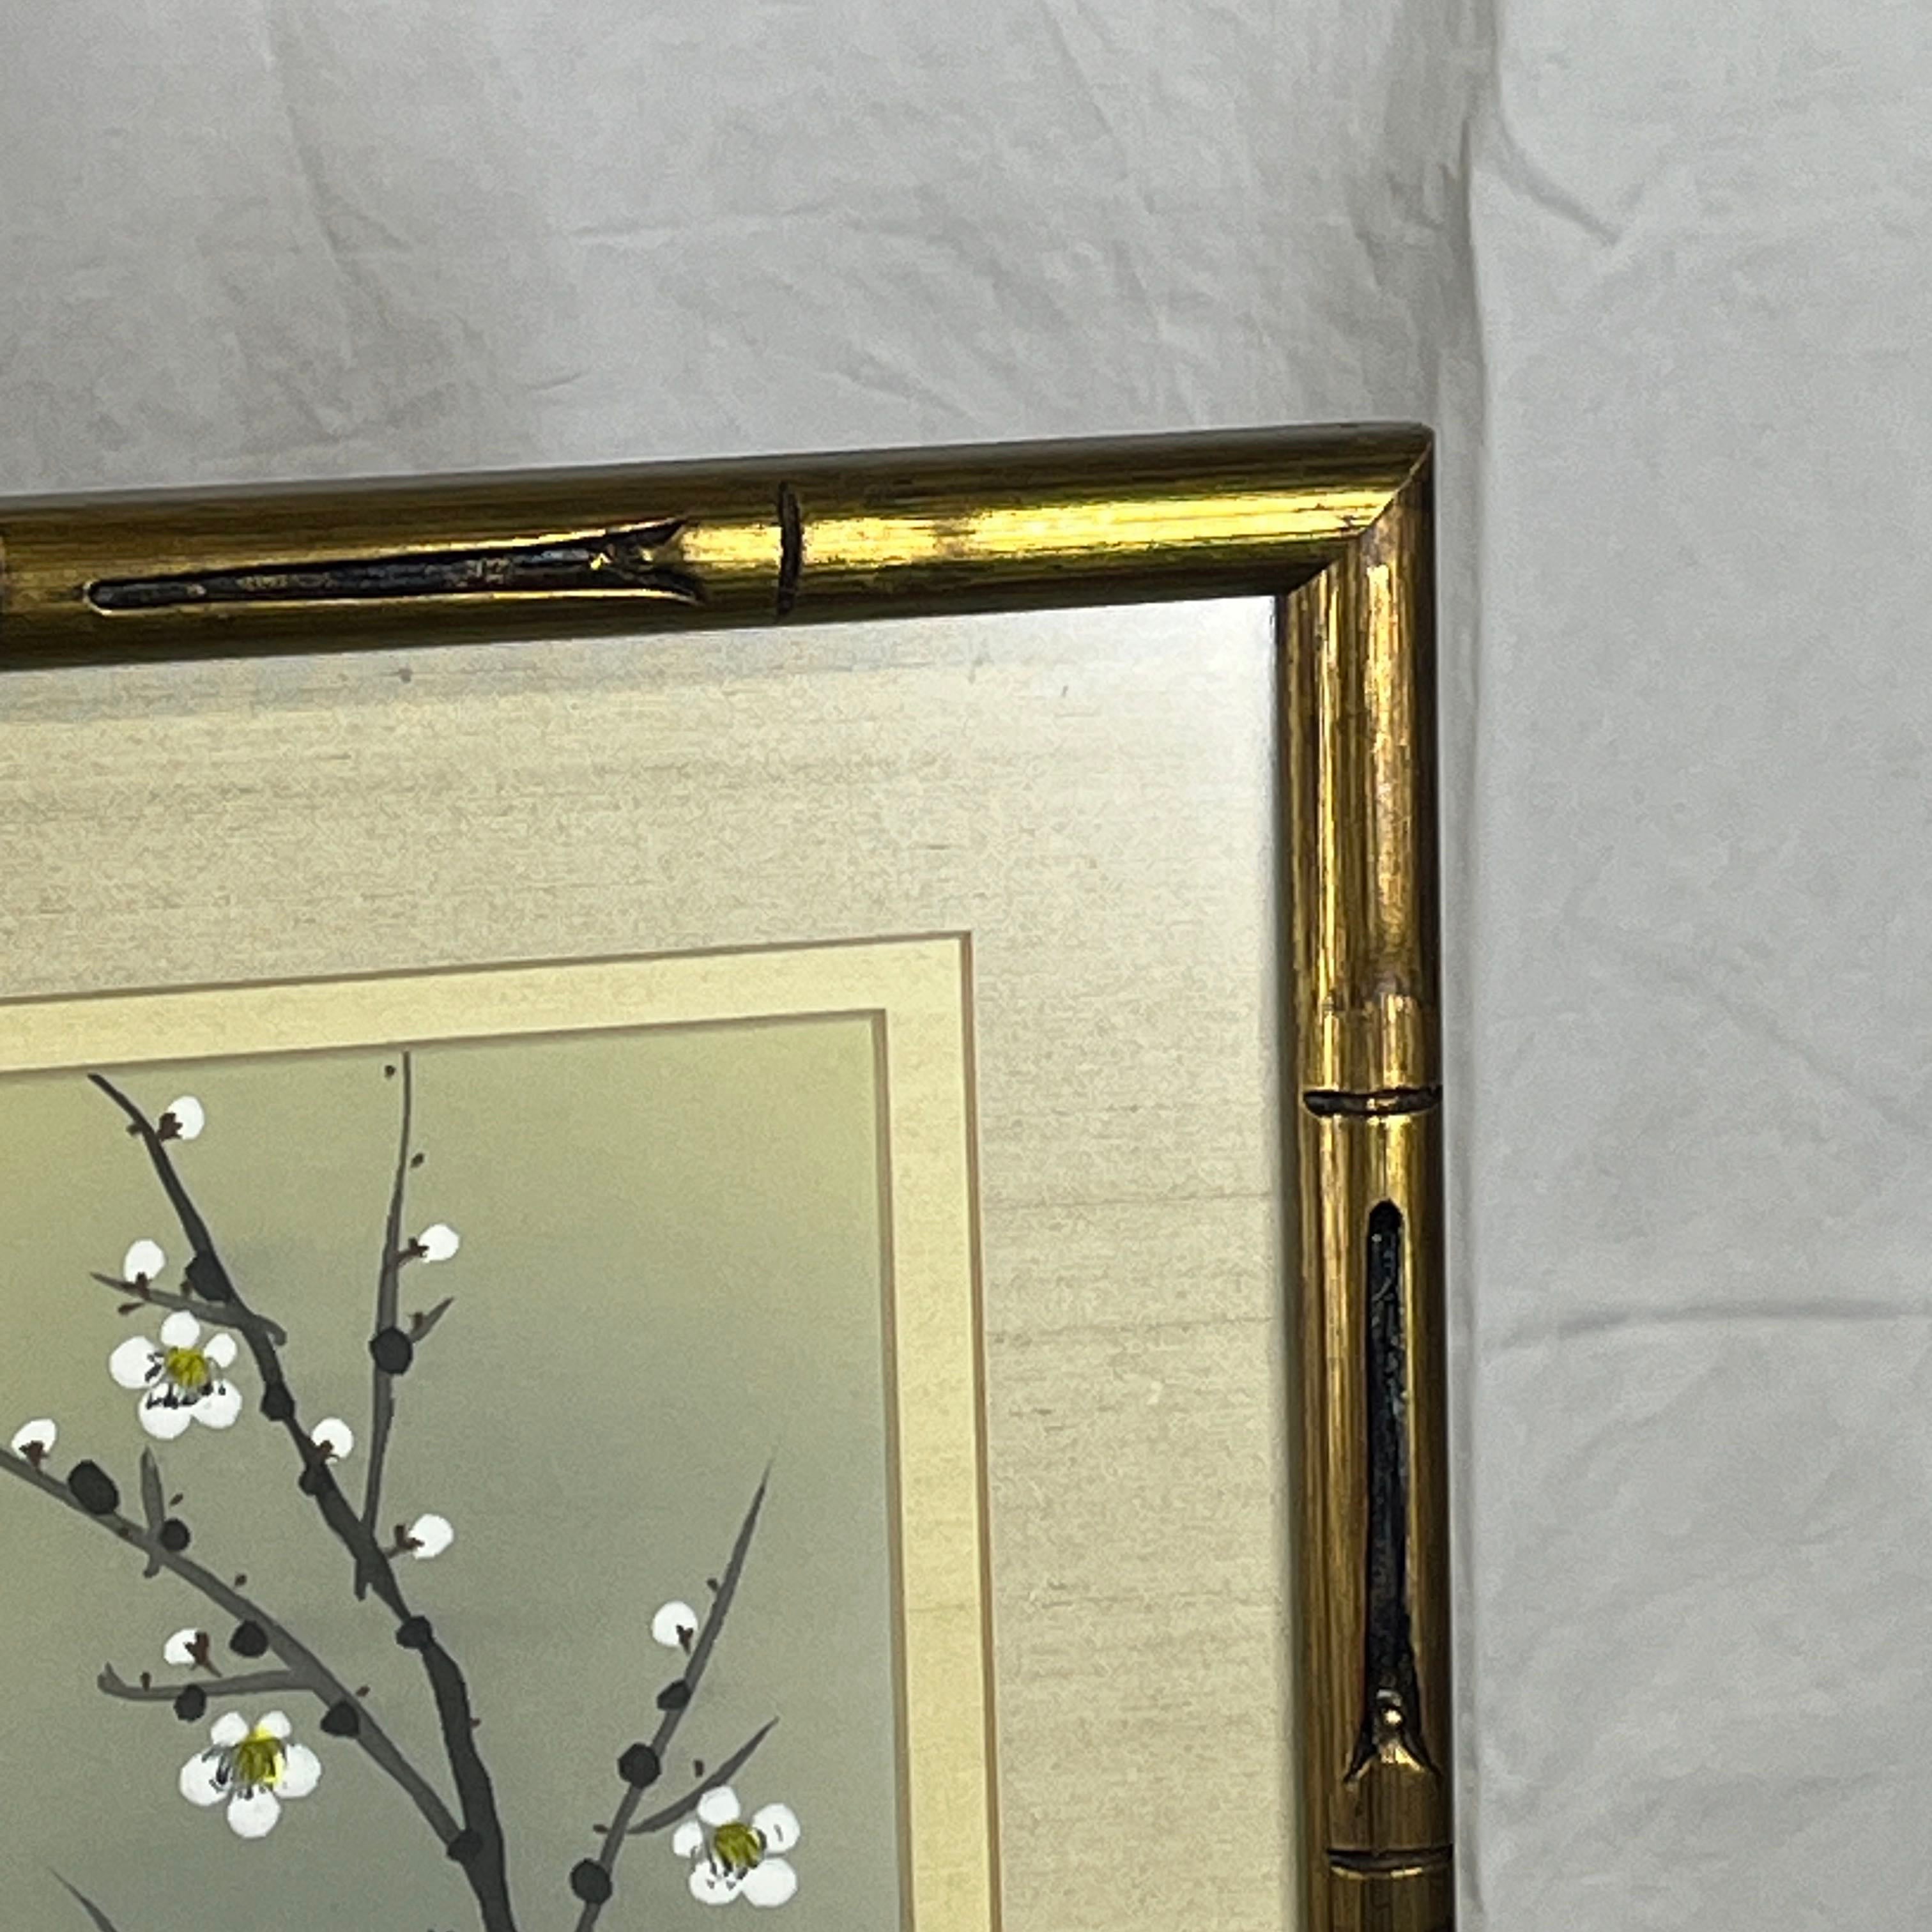 Set of 2 Vintage Chinese Family Tree Golden Bamboo on Board Framed Print